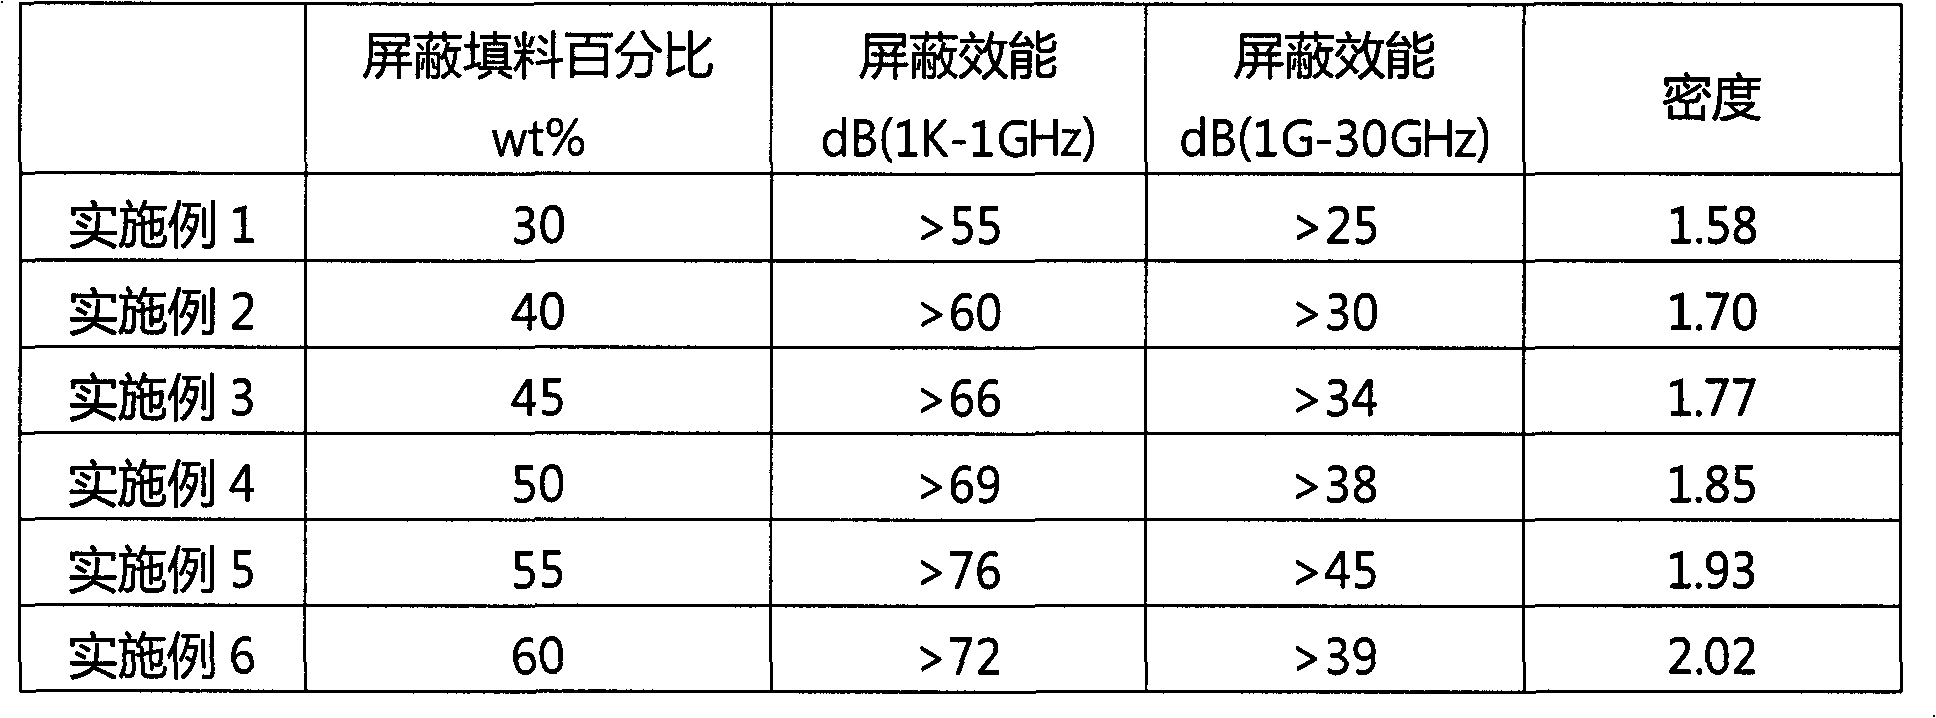 Composite electromagnetic shielding material for cables